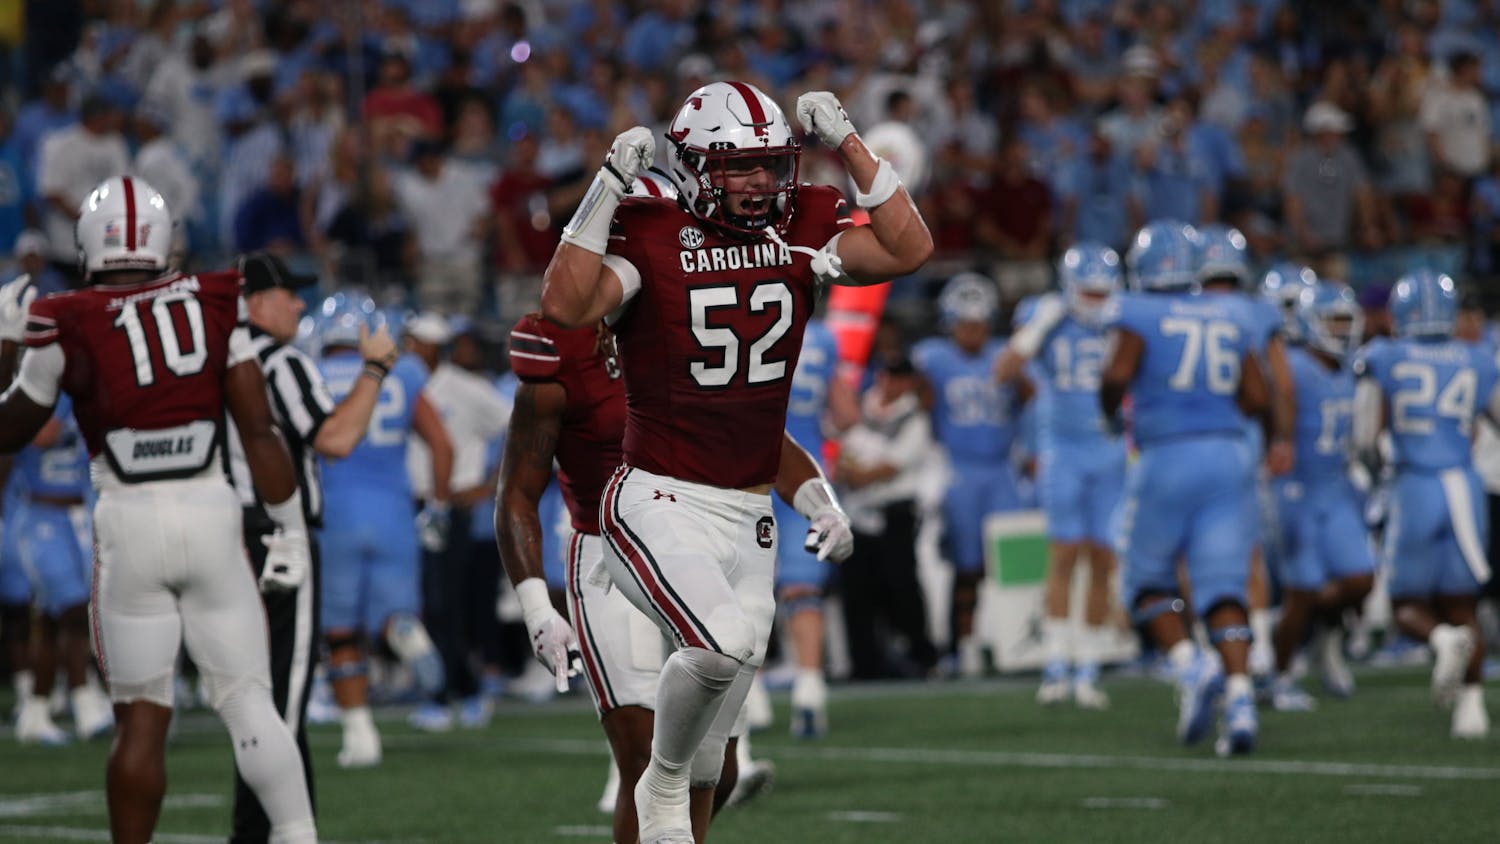 Sophomore linebacker Stone Blanton celebrates after a successful defensive play on Sept. 2, 2023. The South Carolina Gamecocks fell to the UNC Tar Heels 31-17 in Charlotte, North Carolina.